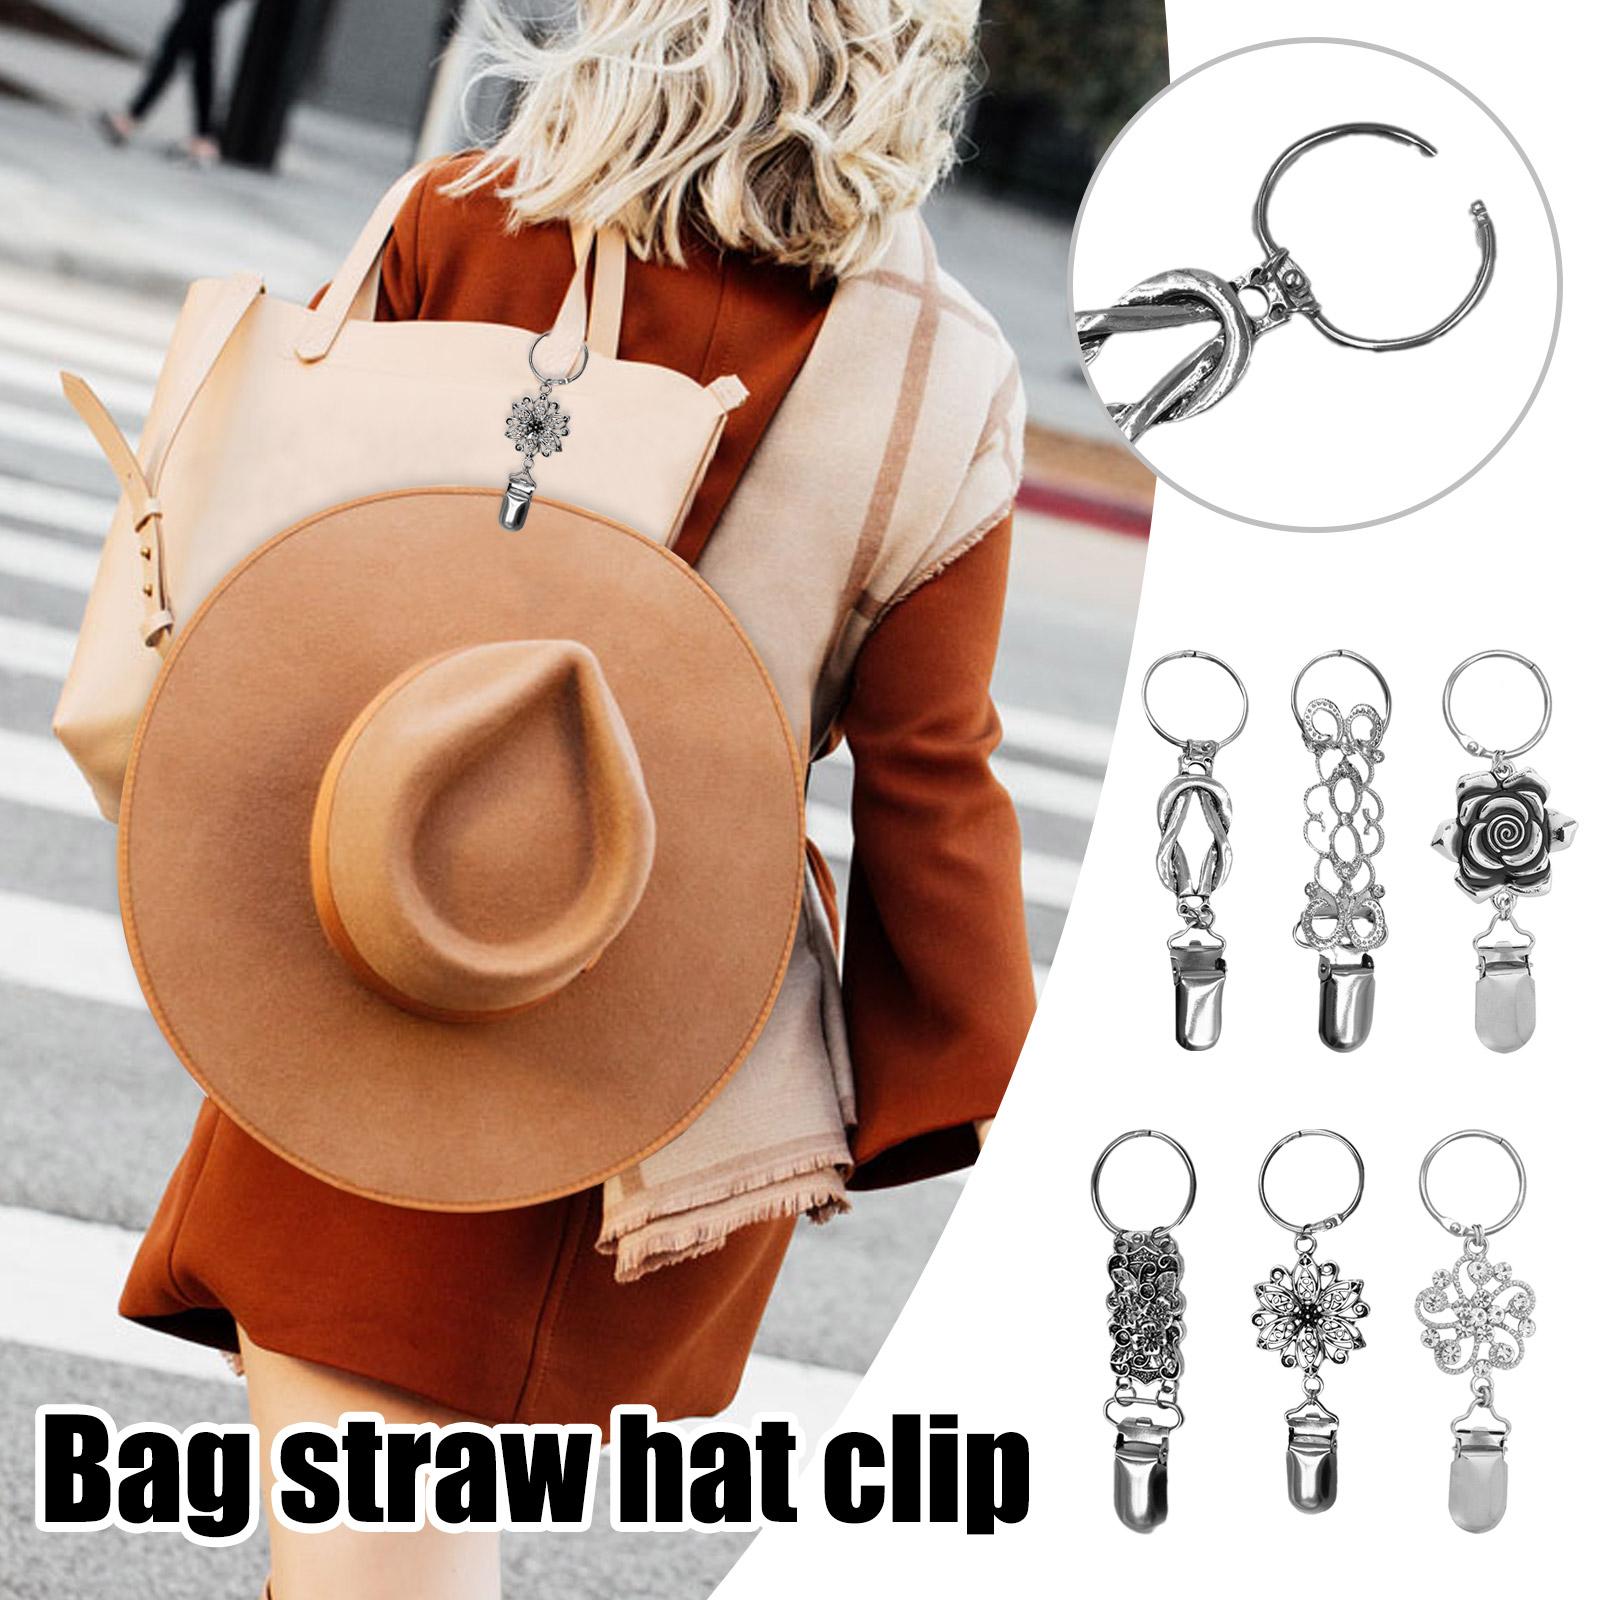 New Hat Clips For Bag Hat Holder For Travel Alloy Accessory Clip Outdoor U7U8 - image 3 of 9